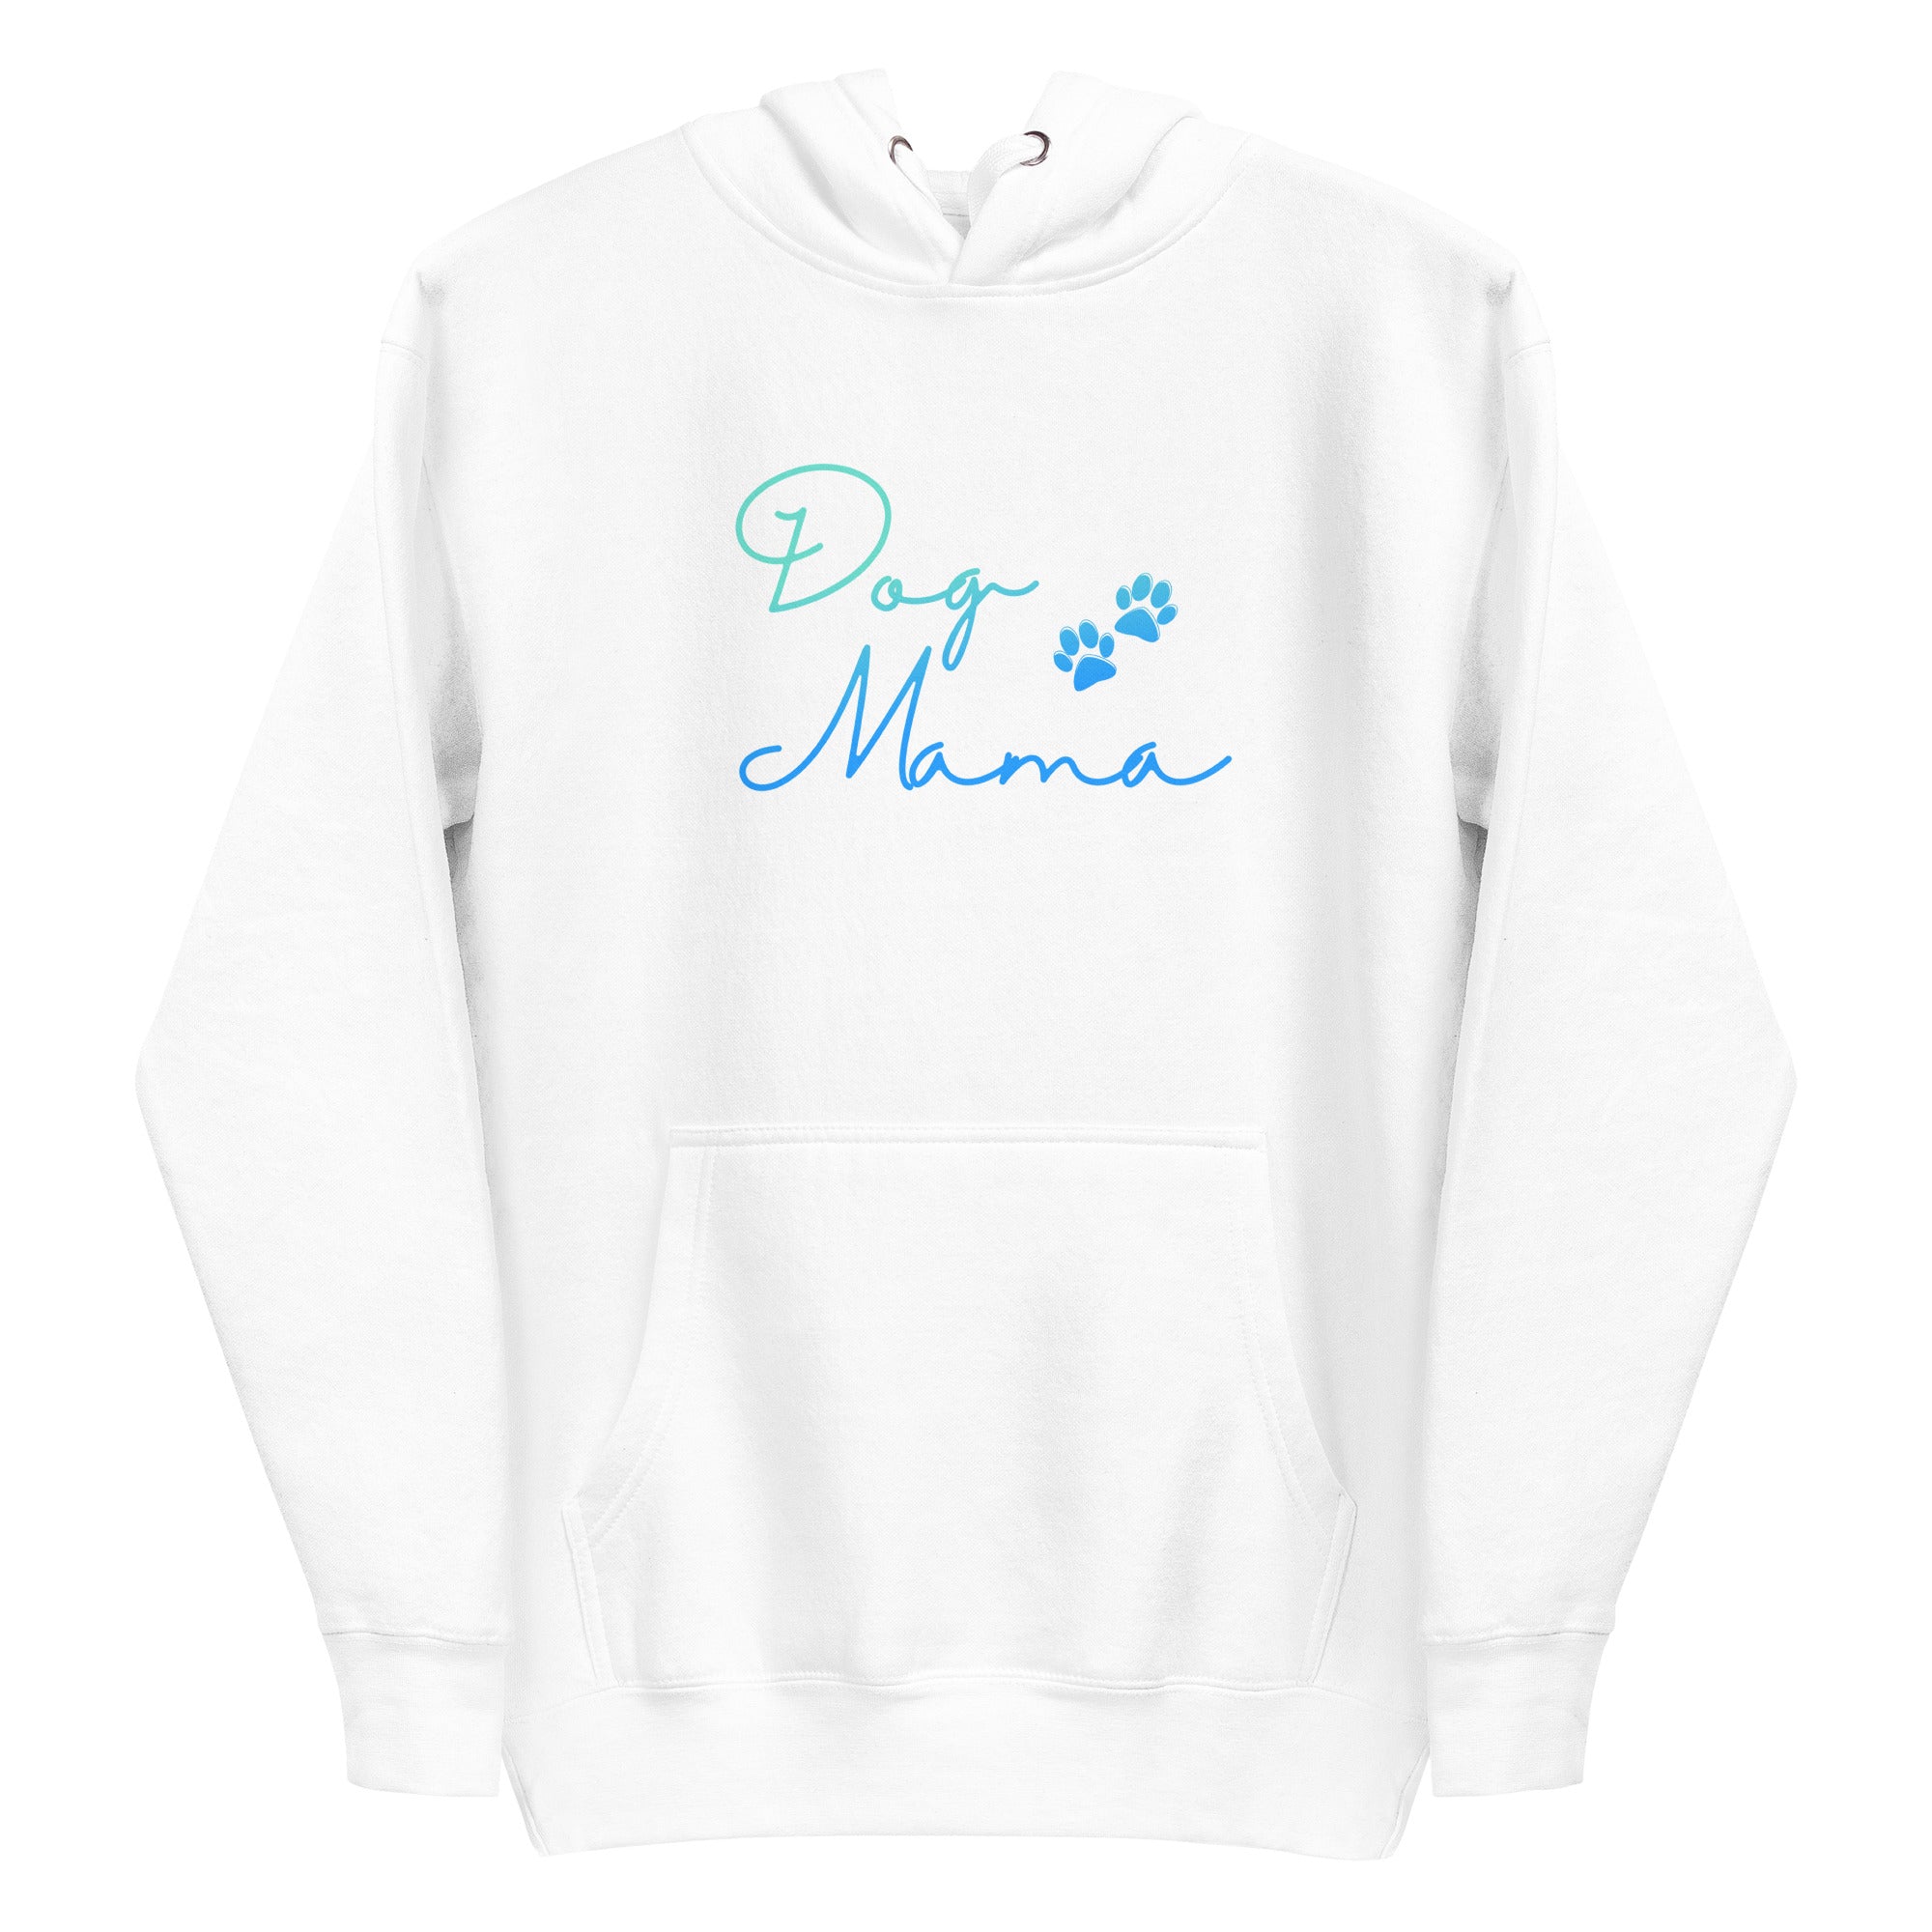 Ombre Dog Mama Pullover Hoodie in Black or White - dog-mama-ombre-pullover-hoodie